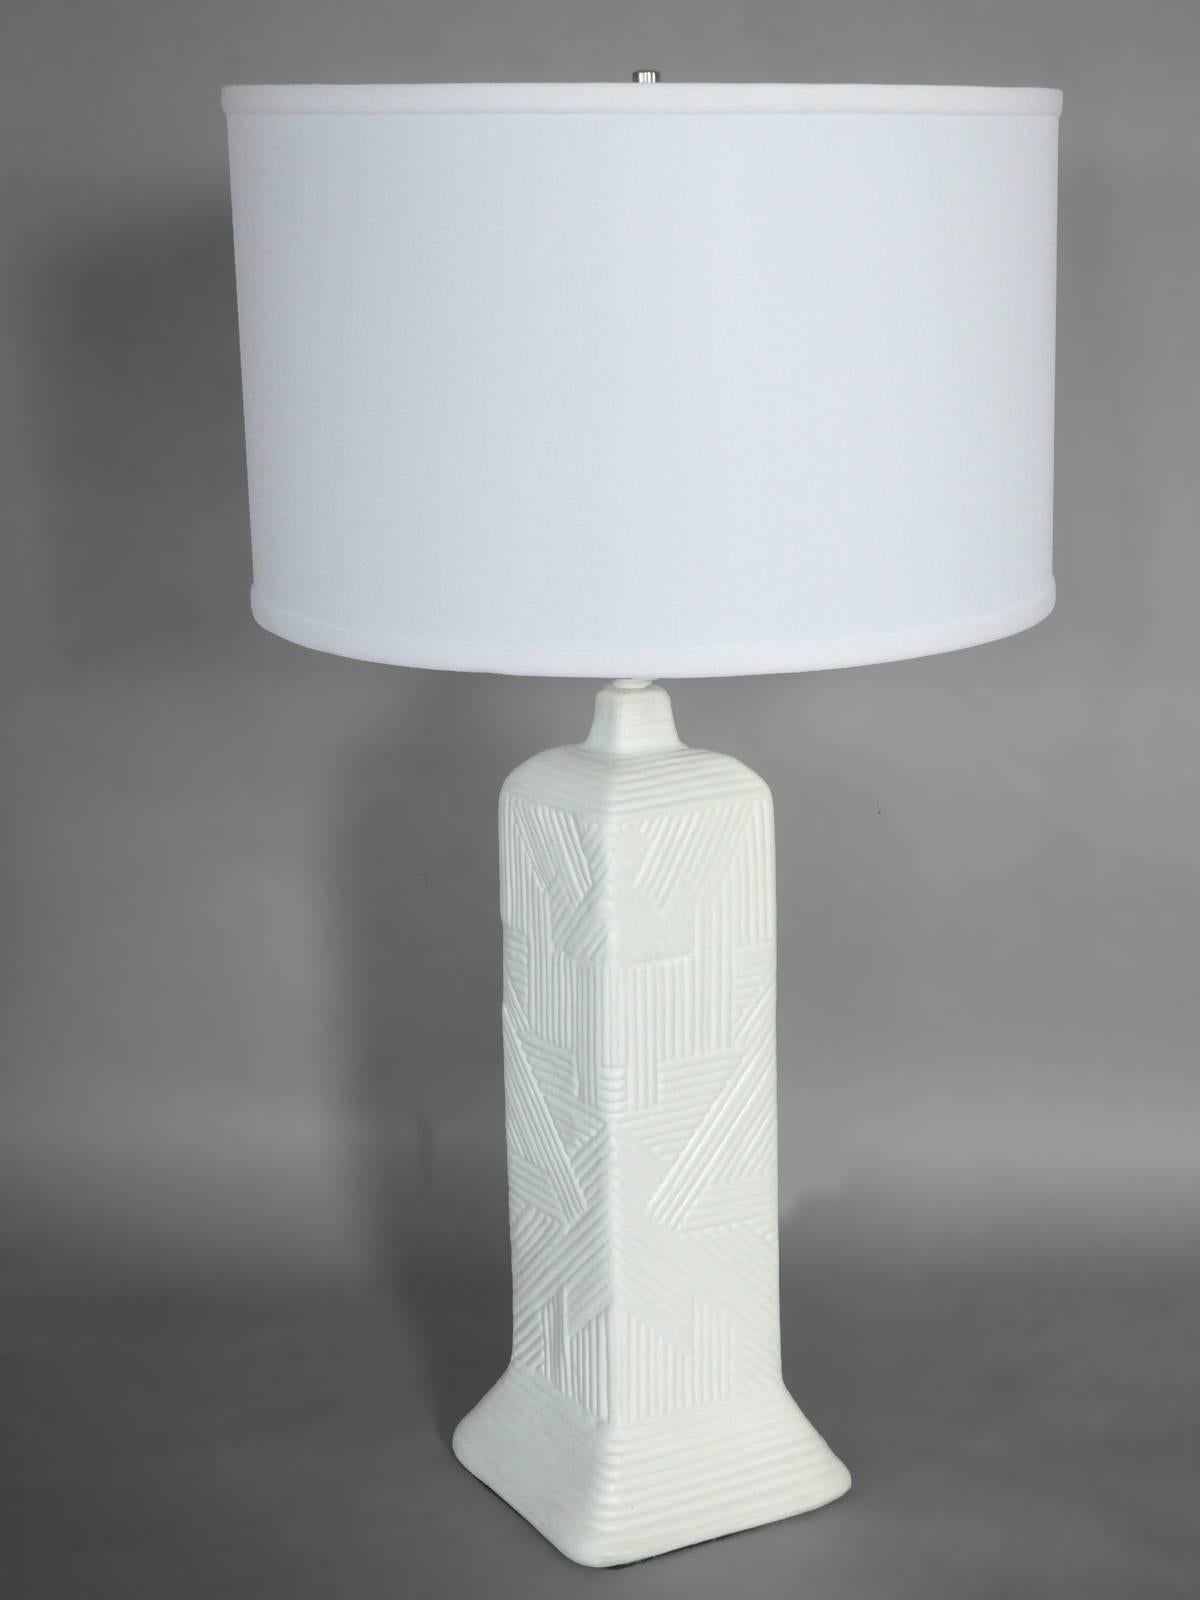 Pair of matte white Art Deco inspired table lamps . Skyscraper styled table lamps with cubist geometric decoration . Lamp body measures 19.5 tall ,  23.5 tall to top of socket ,  Total height to top of Harp 31